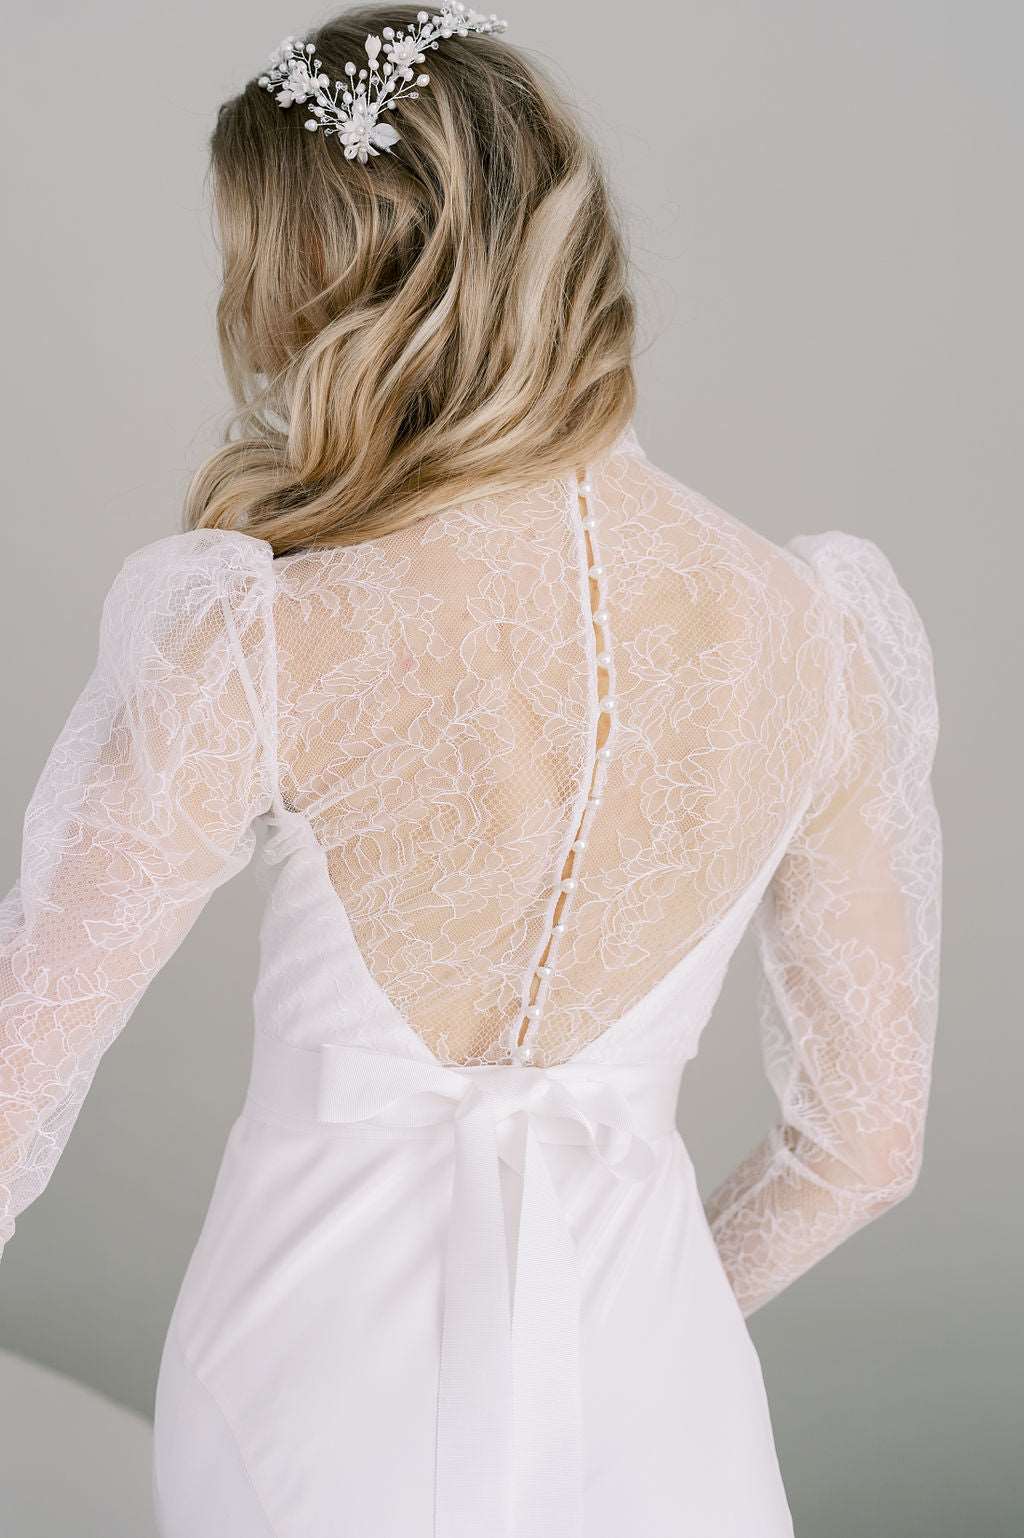 High neck Chantilly lace wedding top with slim puff sleeves.. Handmade by Catherine Langlois, Toronto, Canada